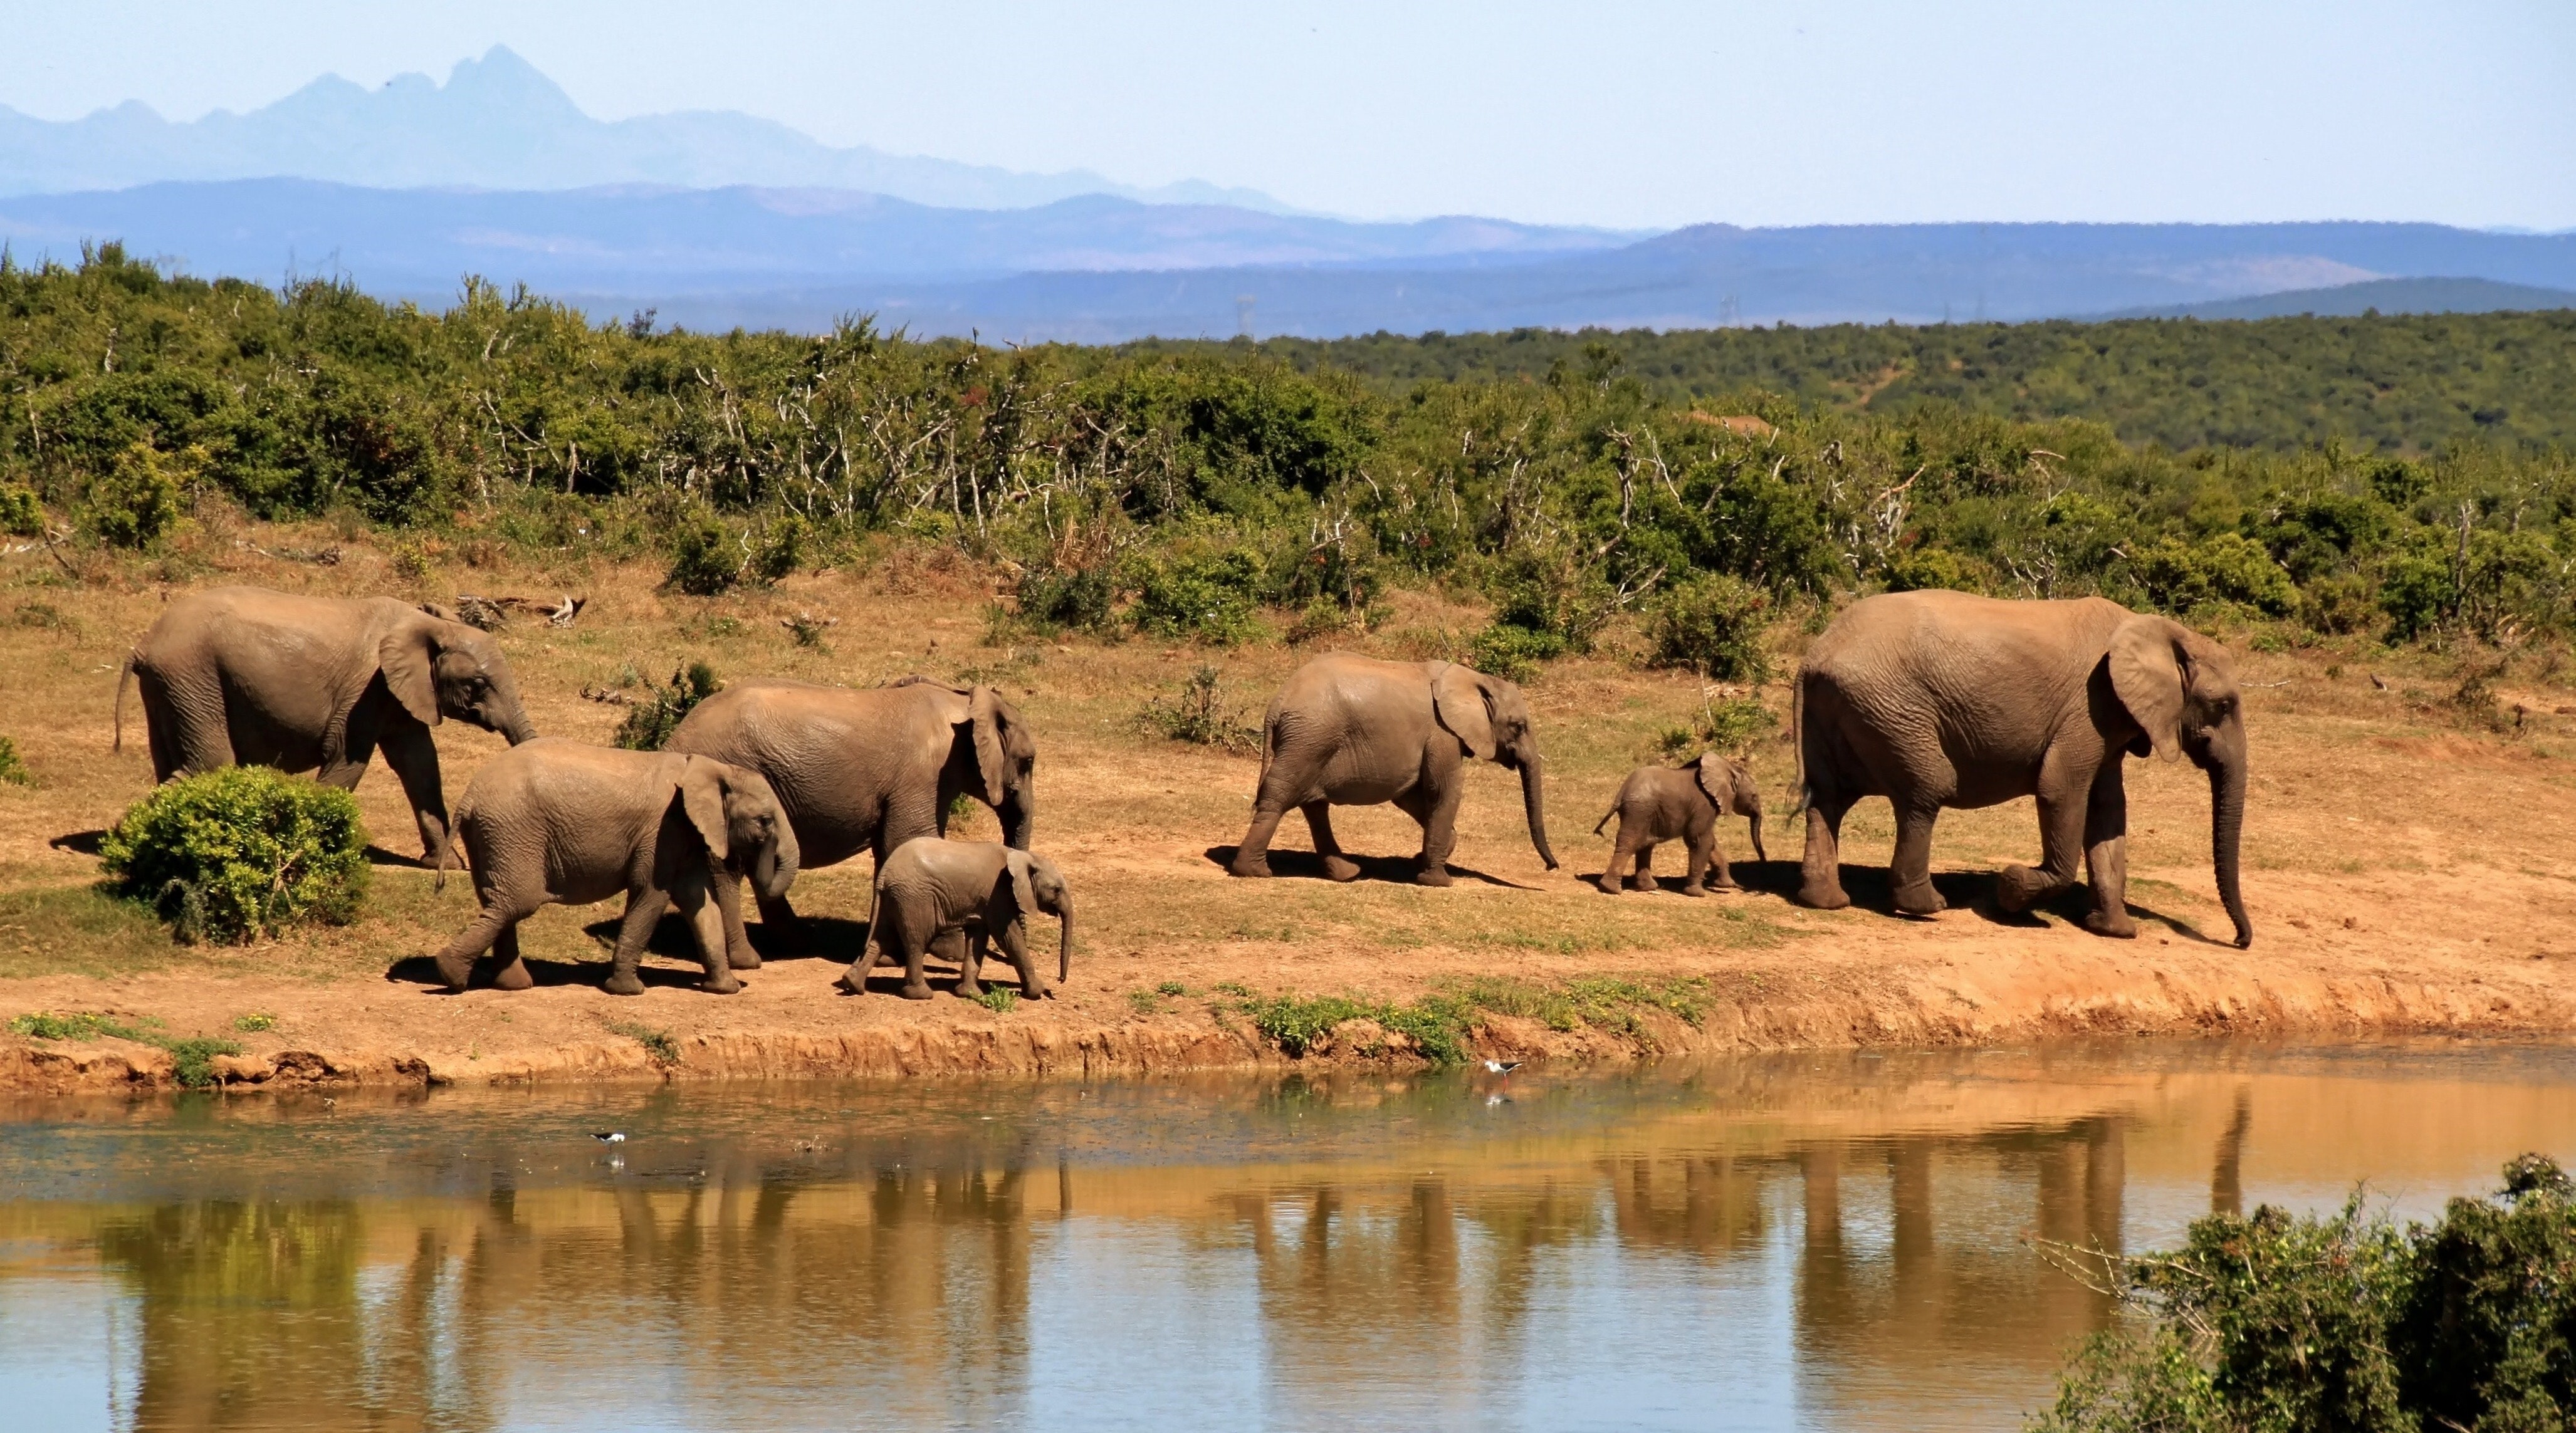 Watch elephants, hippos, wildebeest, zebra and buffalo wallowing and washing on the African planes … over a live-stream during lockdown. Photo: Pexels